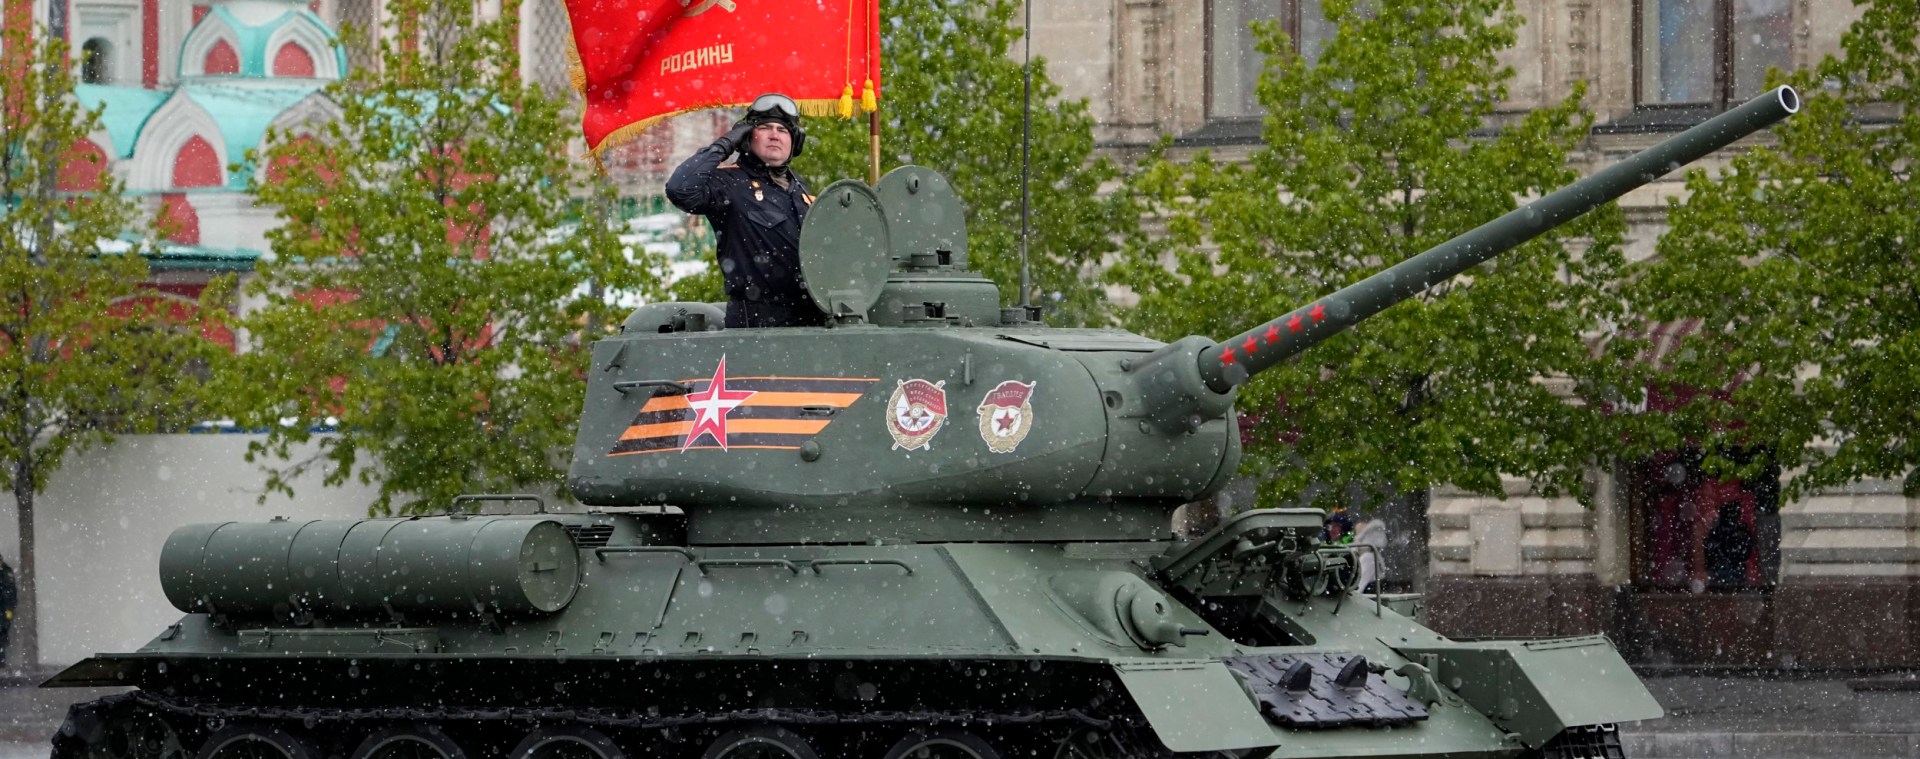 hackers ruin putin's victory day parade with humiliating comparison on live tv